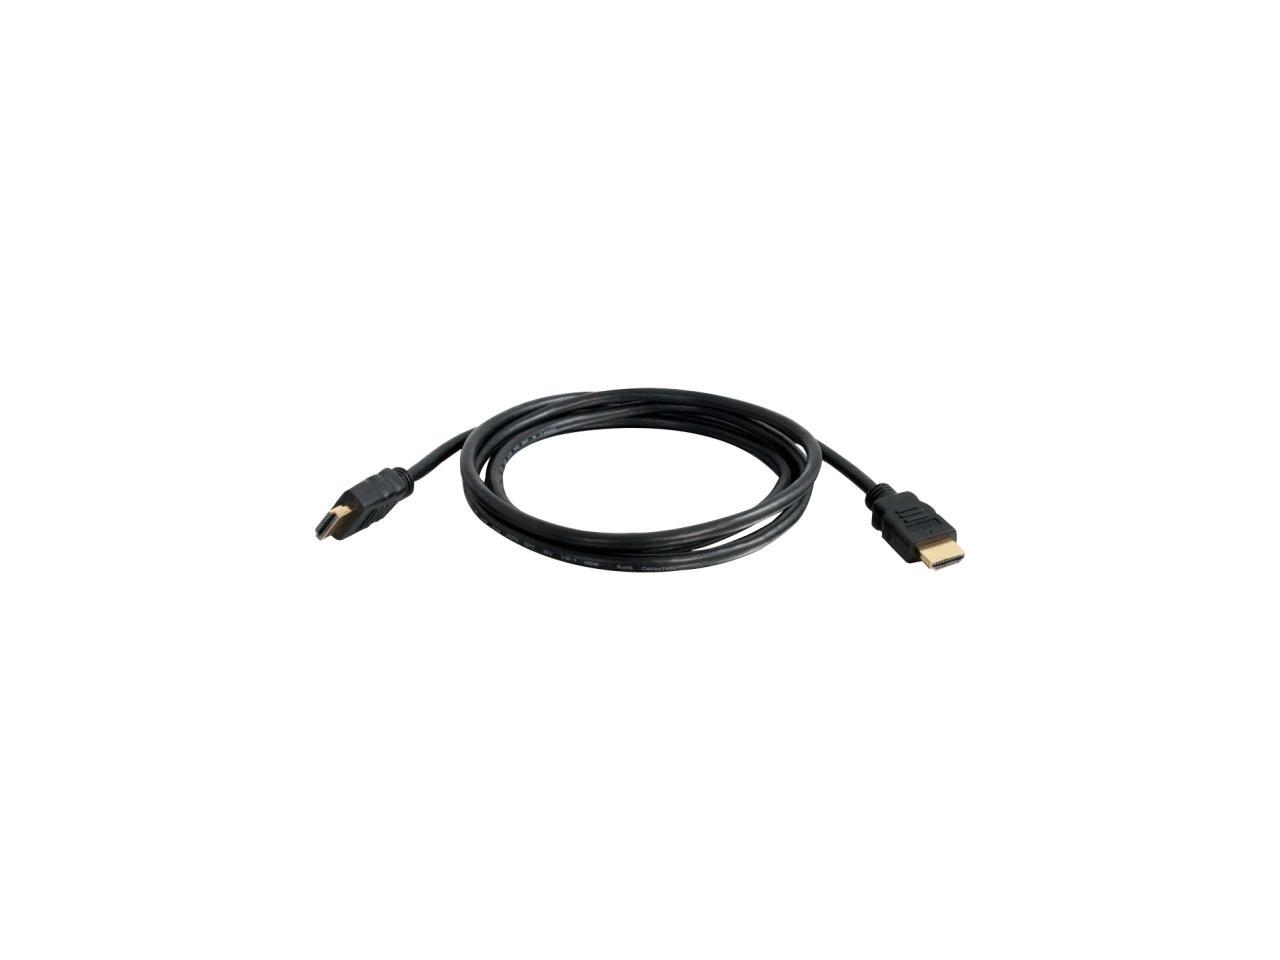 C2G 42500 4K UHD High Speed HDMI Cable (60Hz) with Ethernet for TVs, Laptops, and Chromebooks, Black (1.6 Feet, 0.5 Meters)